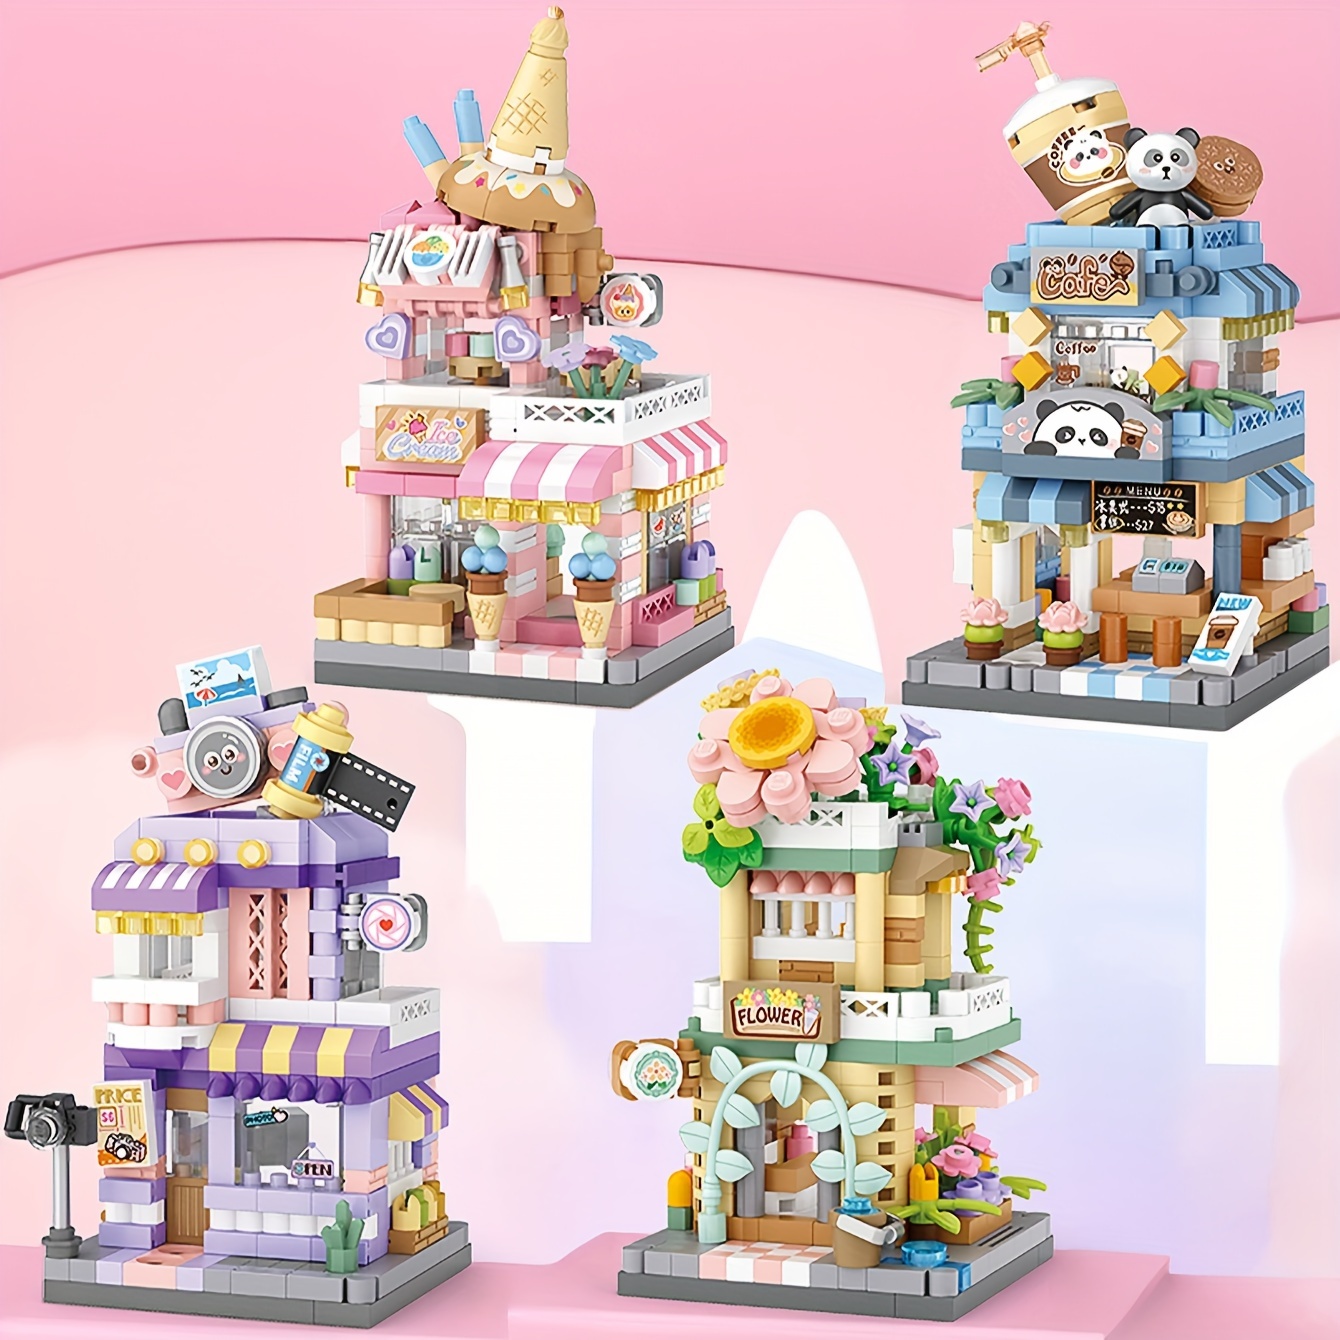 

Coffee Ice Cream Photo Shop Florist Kawaii Cute Mini Street Scene Micro Building Blocks, Birthday Gifts, Desktop Decorations, Christmas Gifts, To Exercise Hands-on Ability